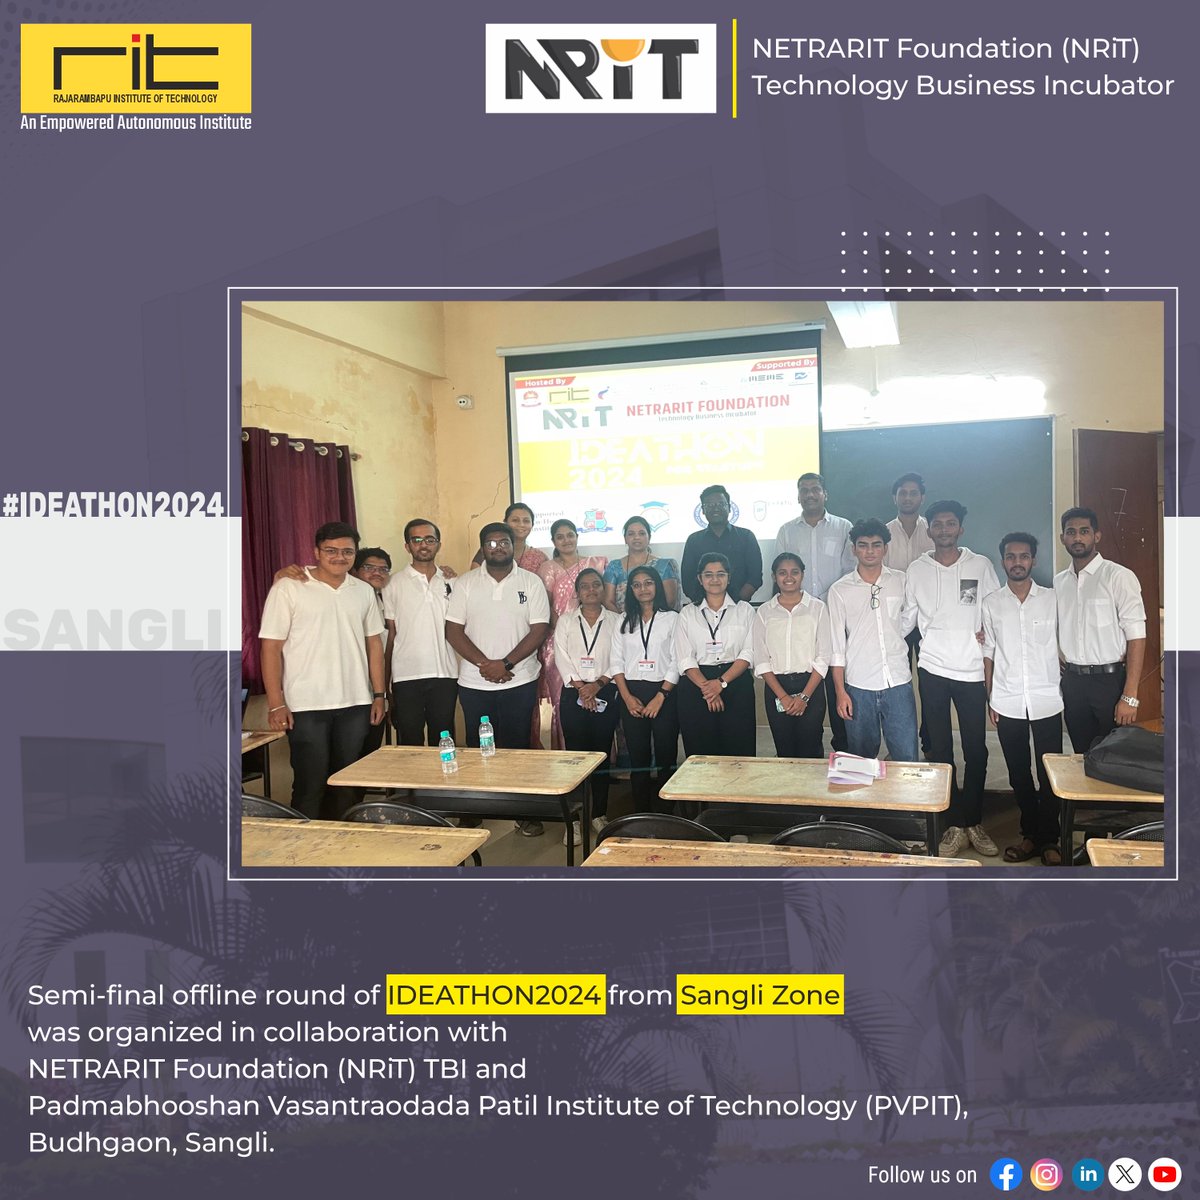 The semi-final offline round of IDEATHON2024 from Sangli Zone was organized on 15th March, 2024 in collaboration with NETRARIT Foundation (NRiT) TBI and Padmabhooshan Vasantraodada Patil Institute of Technology (PVPIT), Budhgaon, Sangli. 

#IDEATHON2024 #Semifinal #ideas